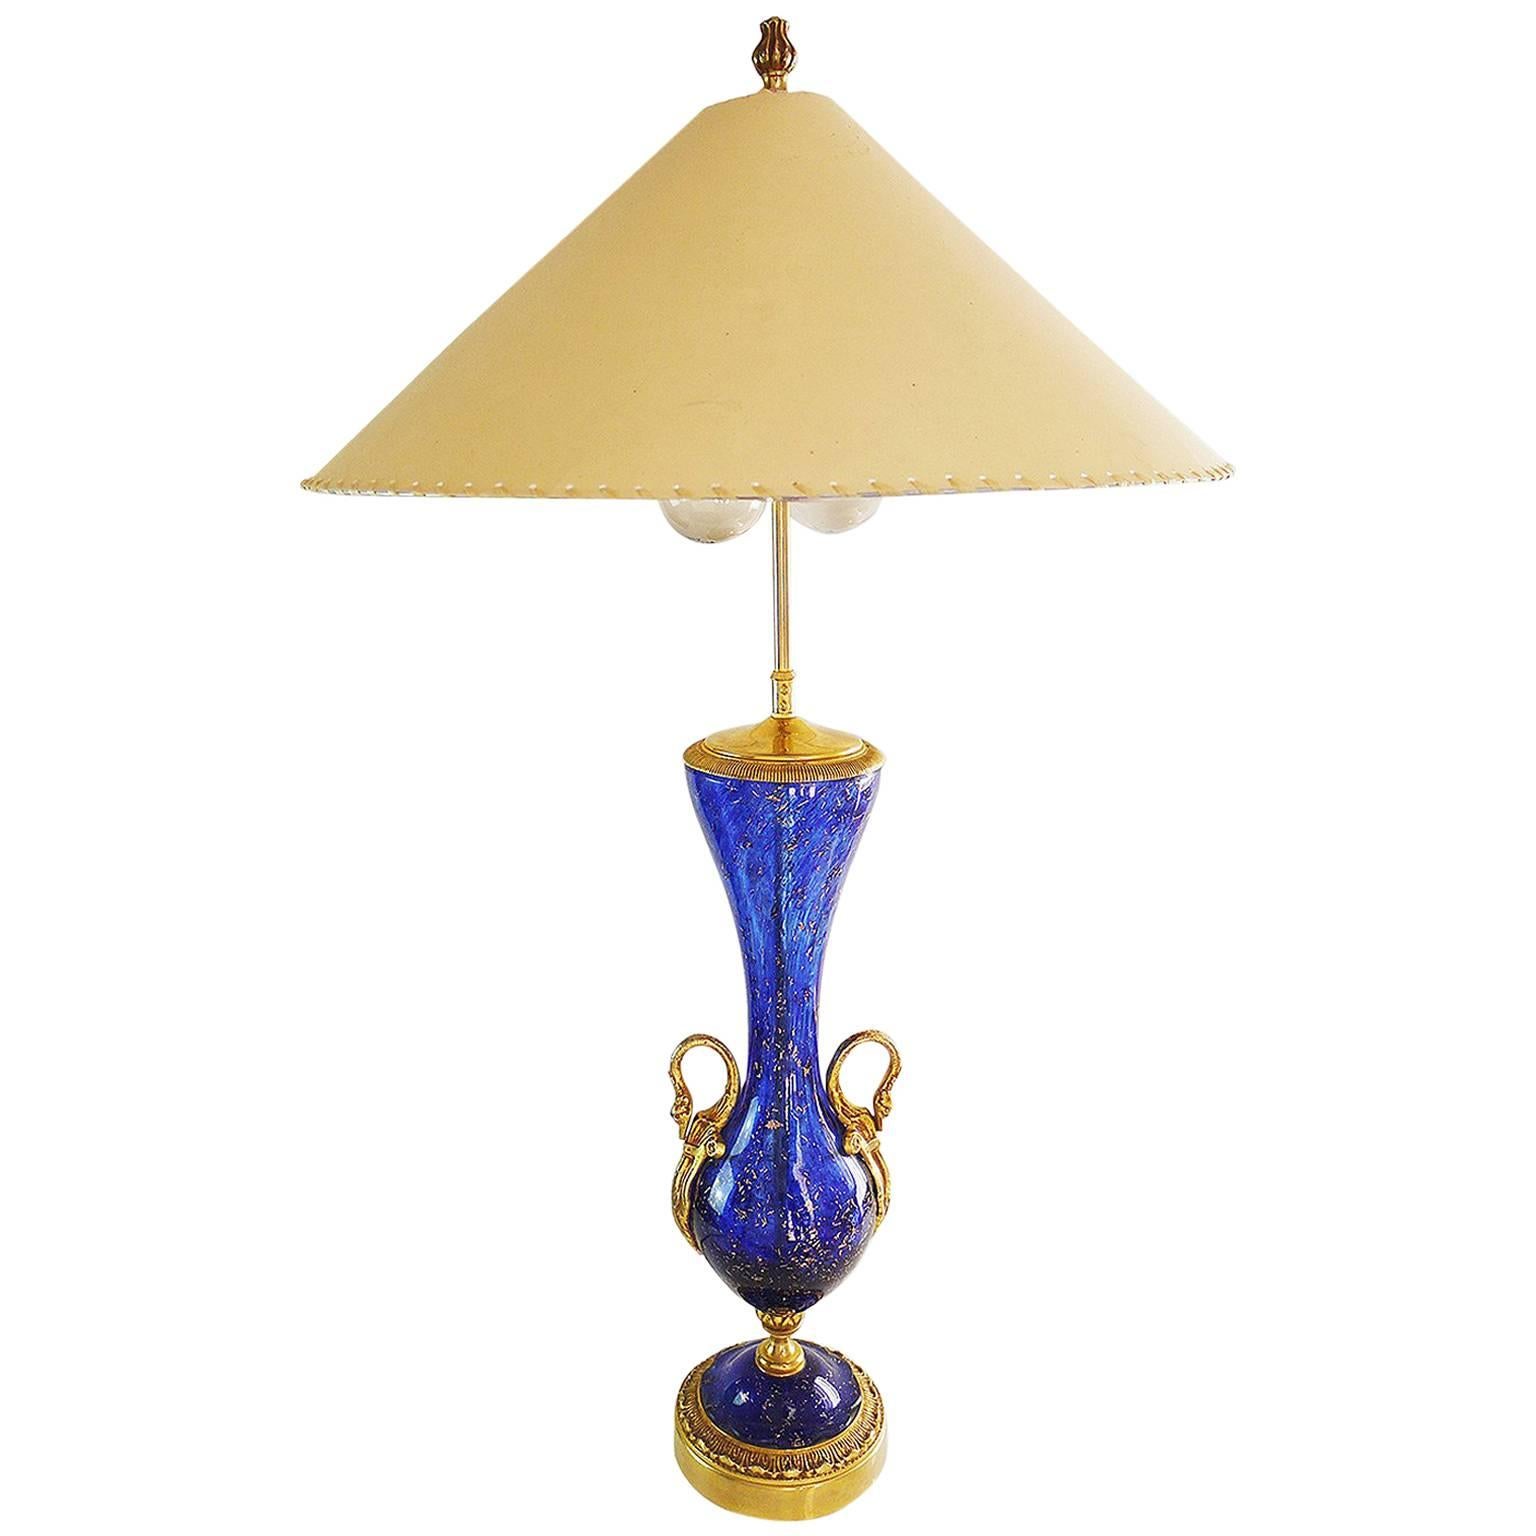 Large Murano Glass Aventurine Swan Urn Table Lamp by Barovier & Toso, Italy